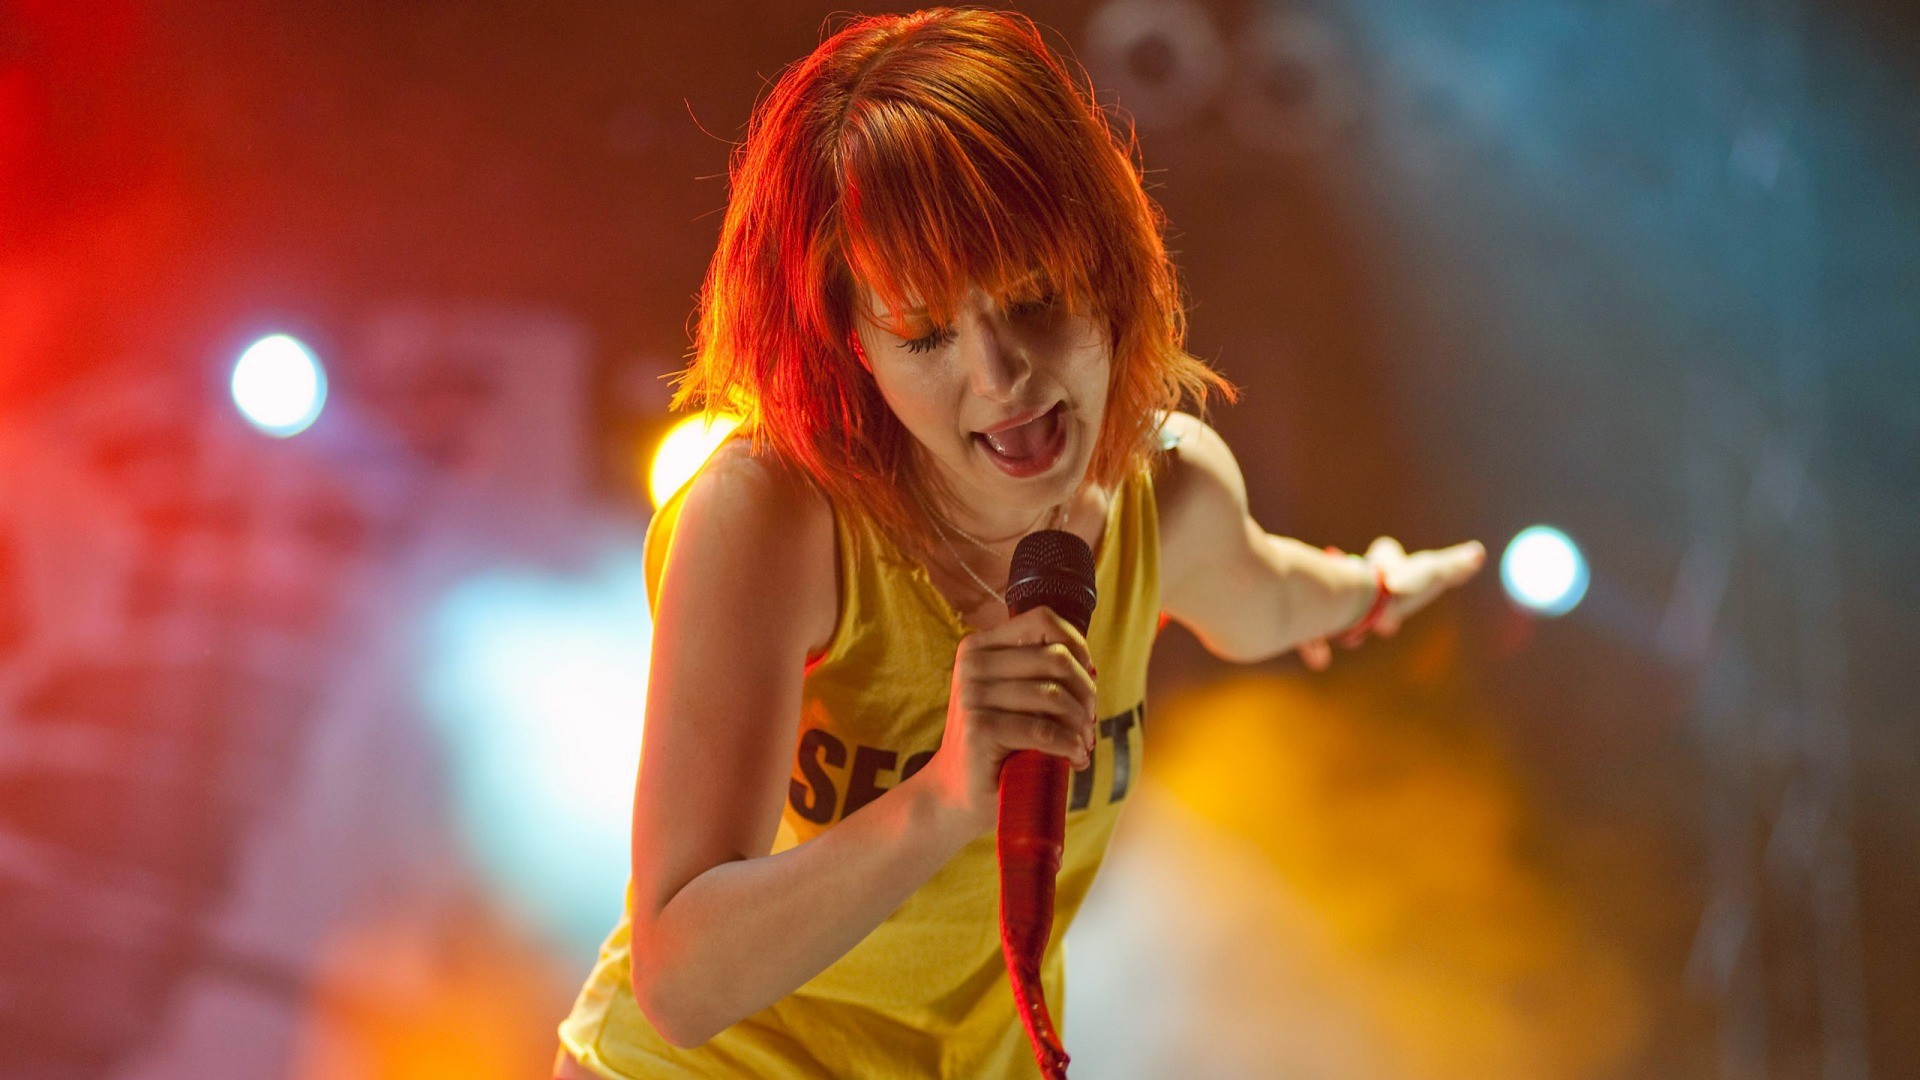 Singer Hayley Williams wallpapers and images - wallpapers 